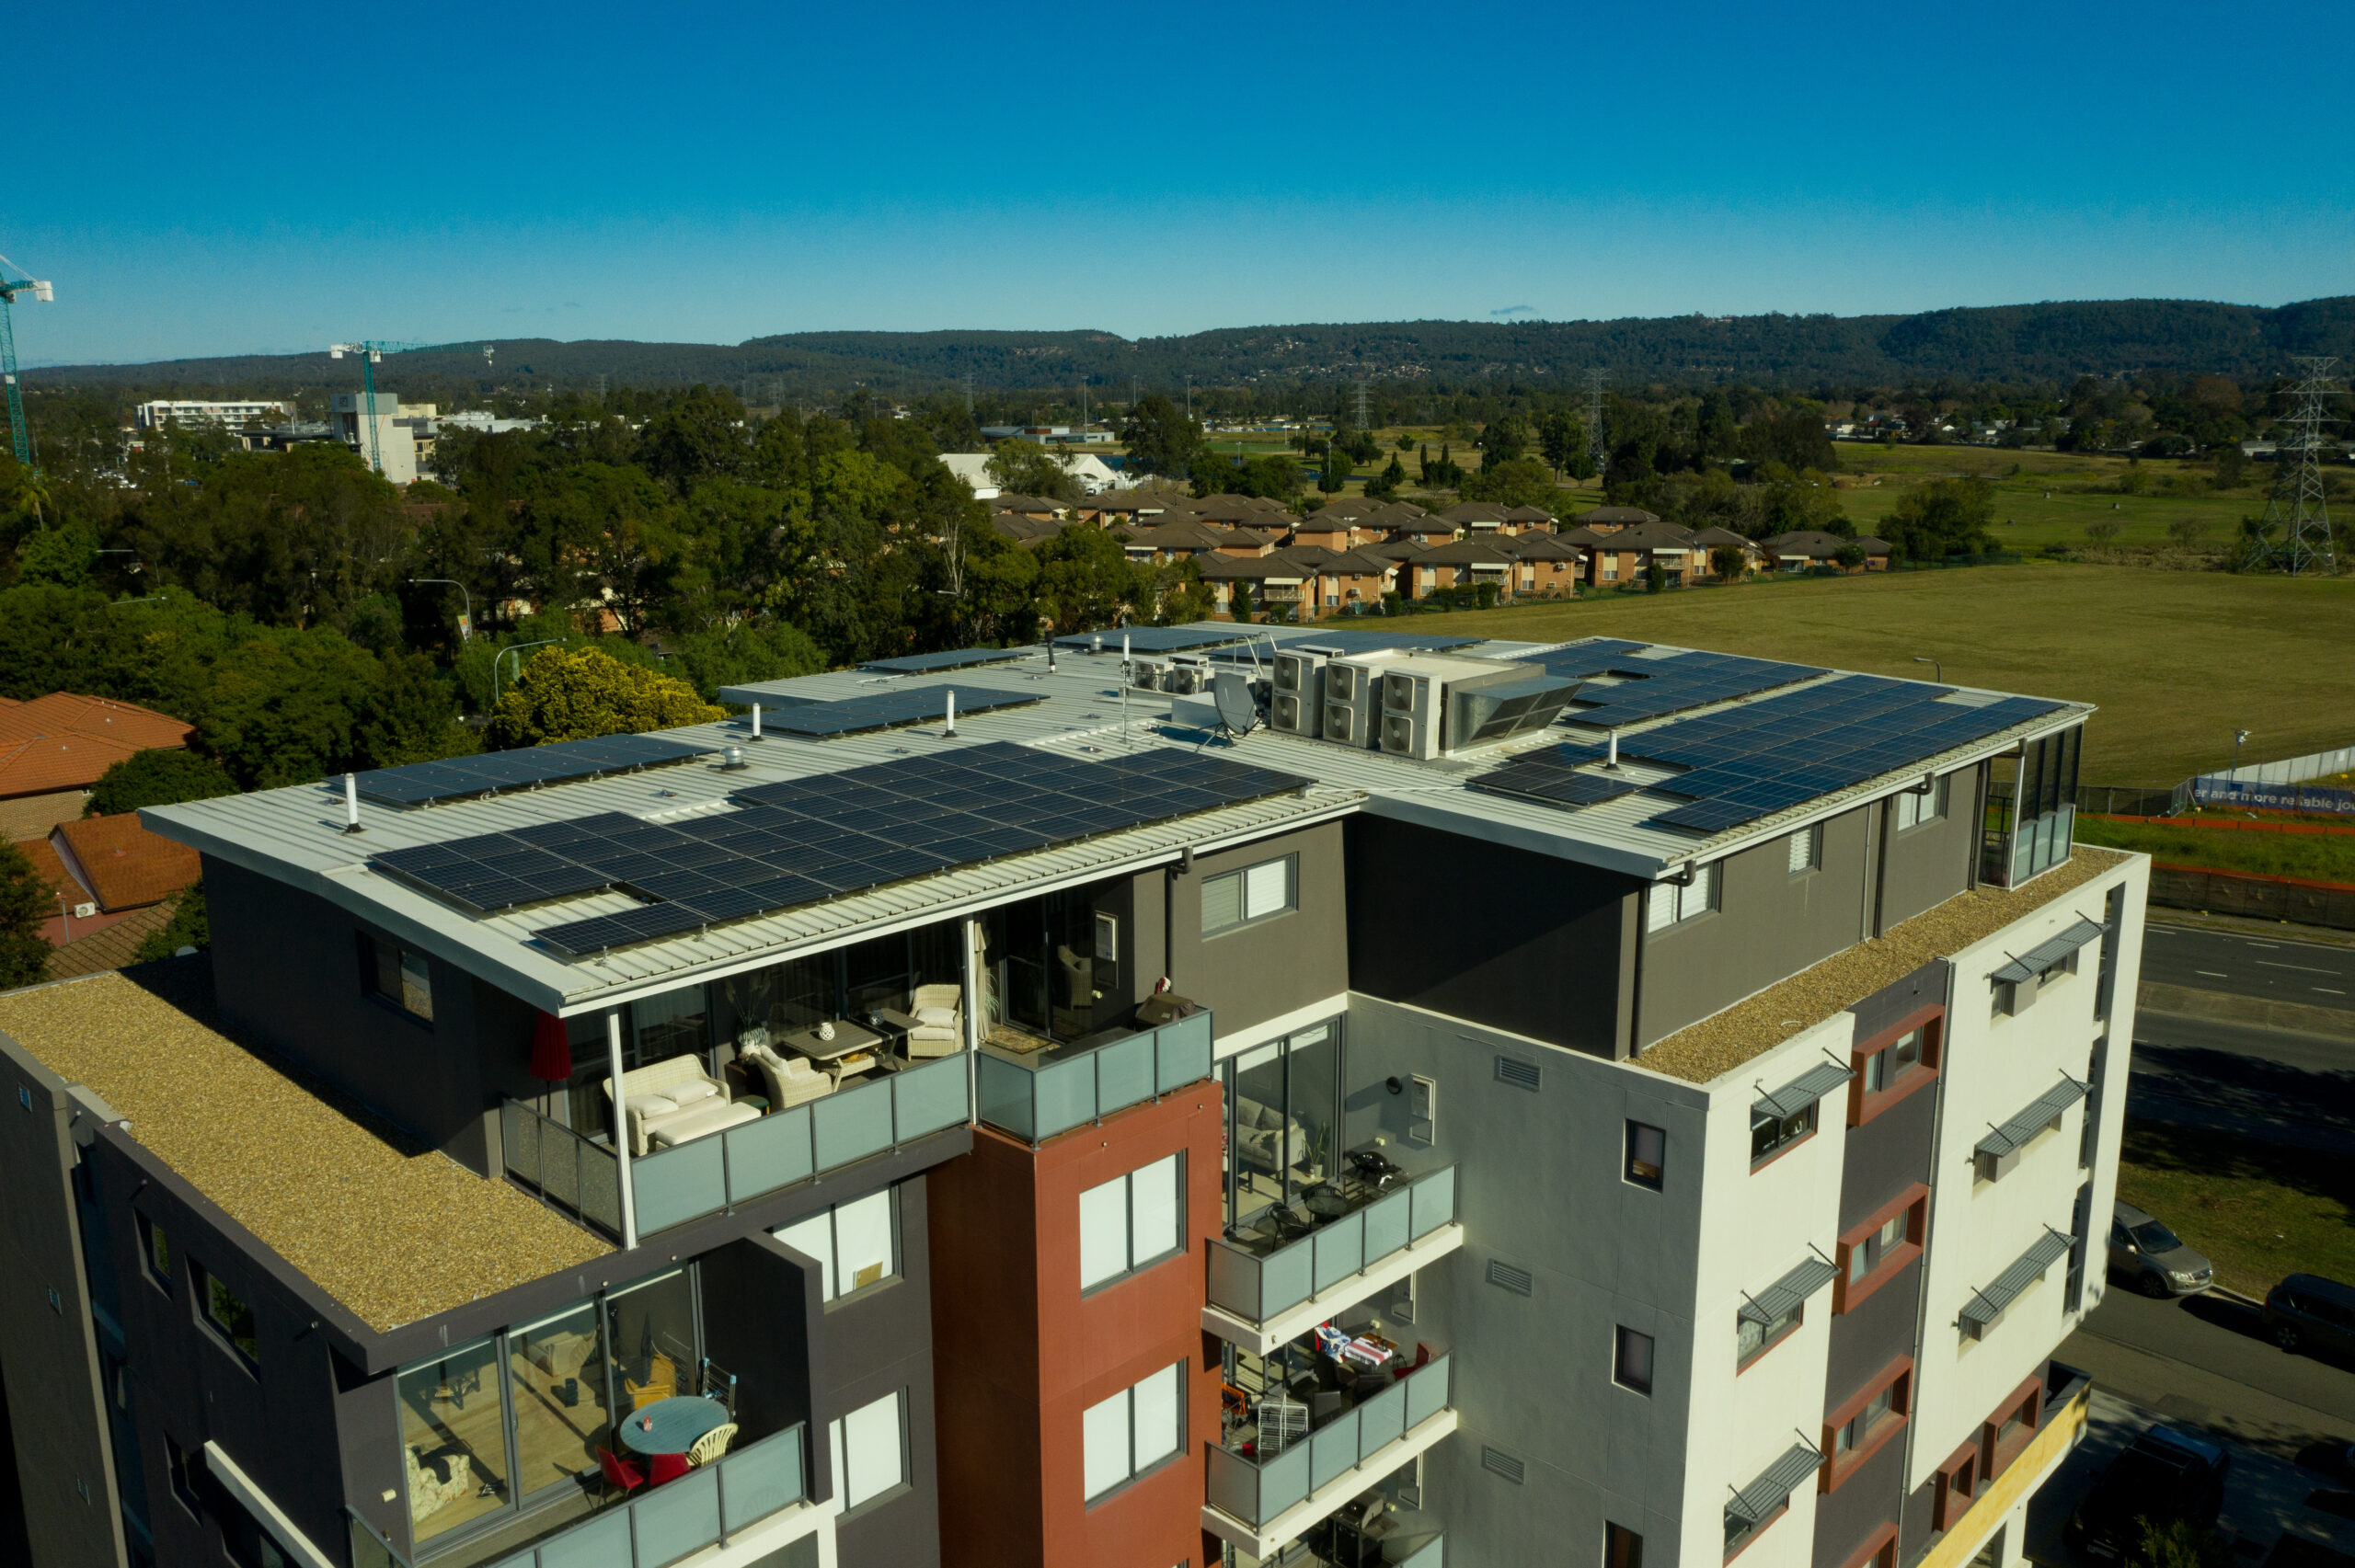 Solar installation at John Tipping apartment complex in Penrith